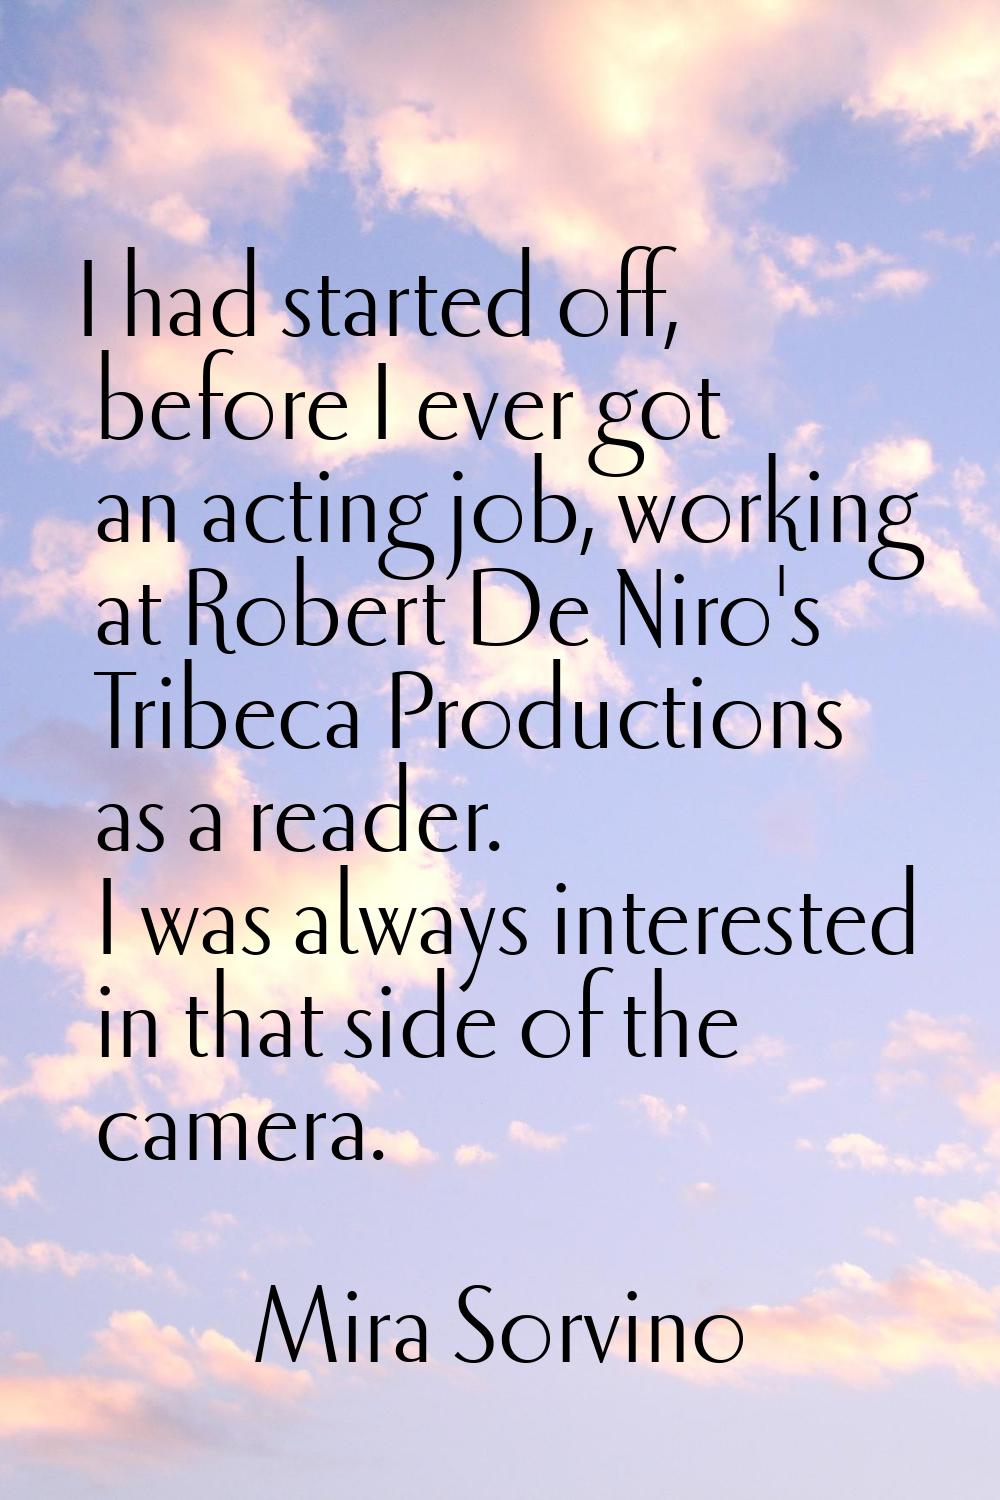 I had started off, before I ever got an acting job, working at Robert De Niro's Tribeca Productions